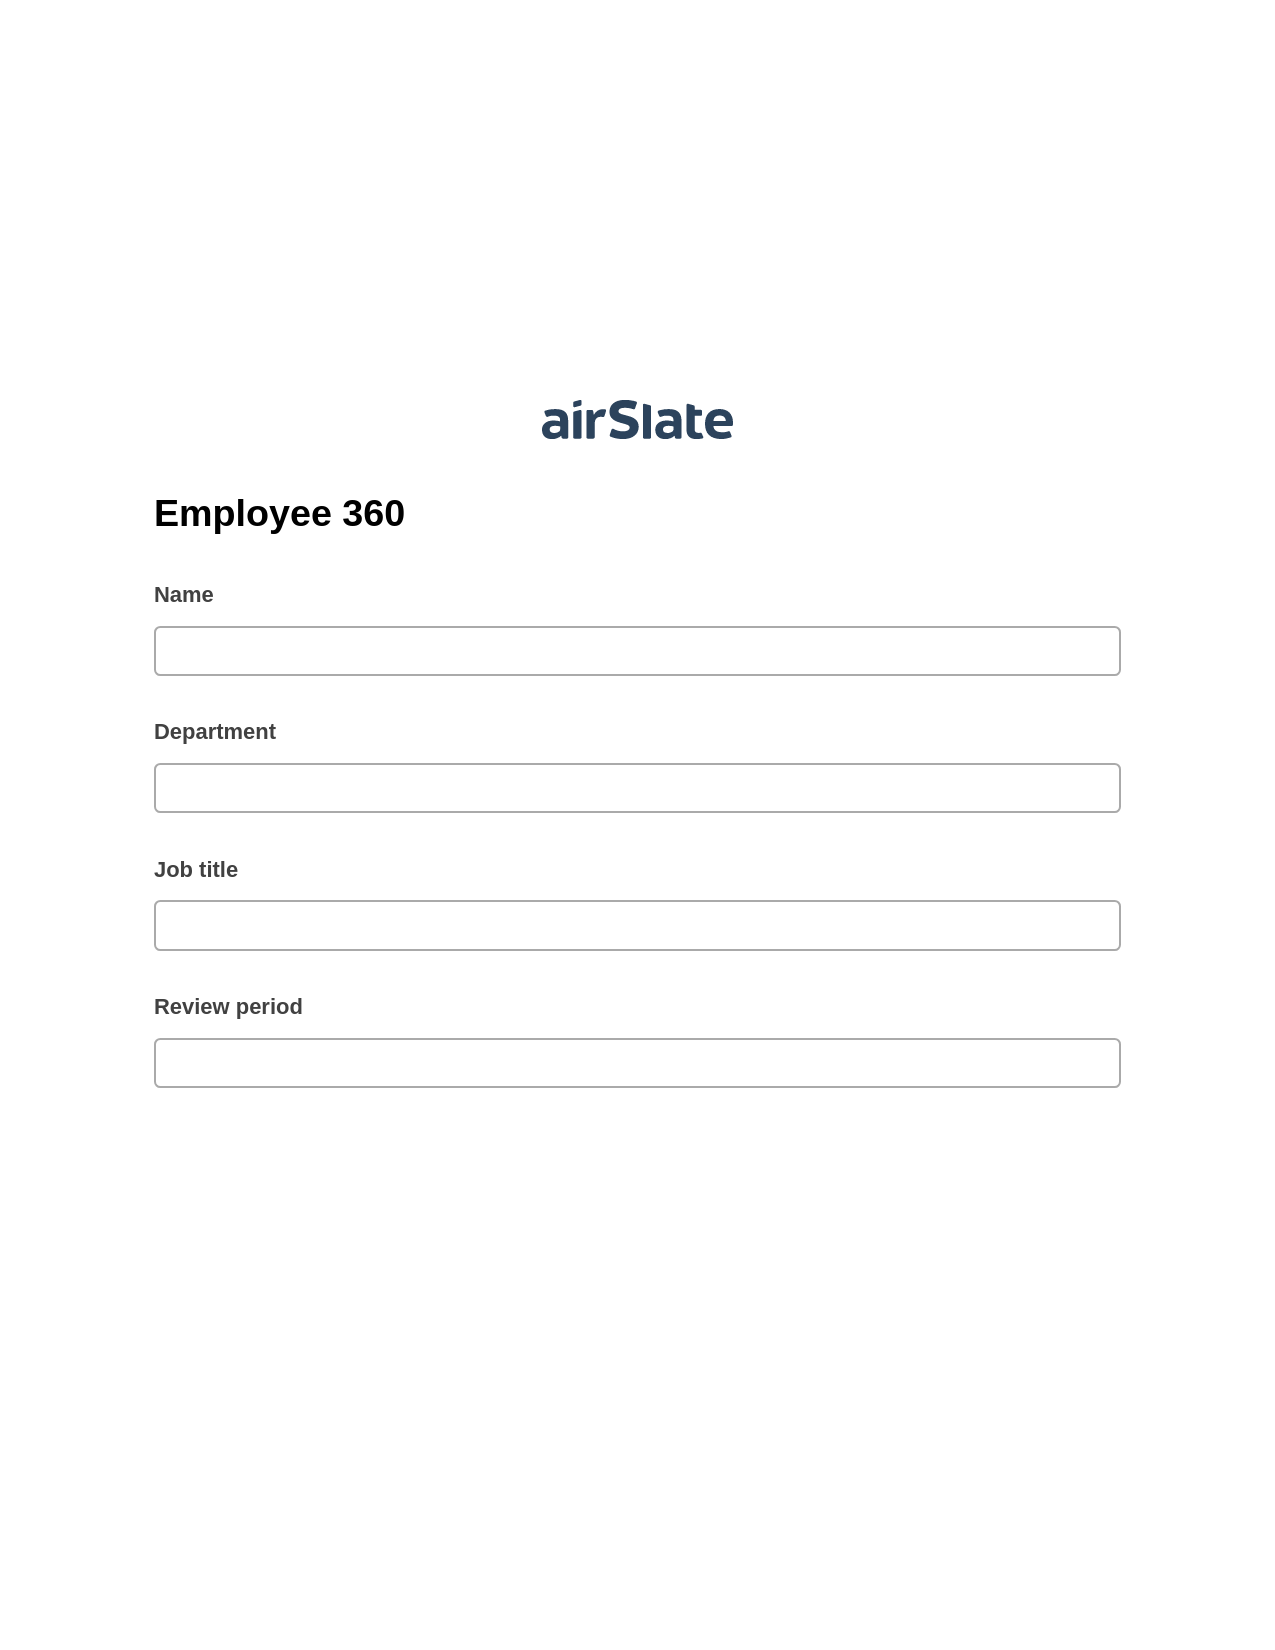 Employee 360 Pre-fill from Excel Spreadsheet Bot, Export to MS Dynamics 365 Bot, Export to Excel 365 Bot